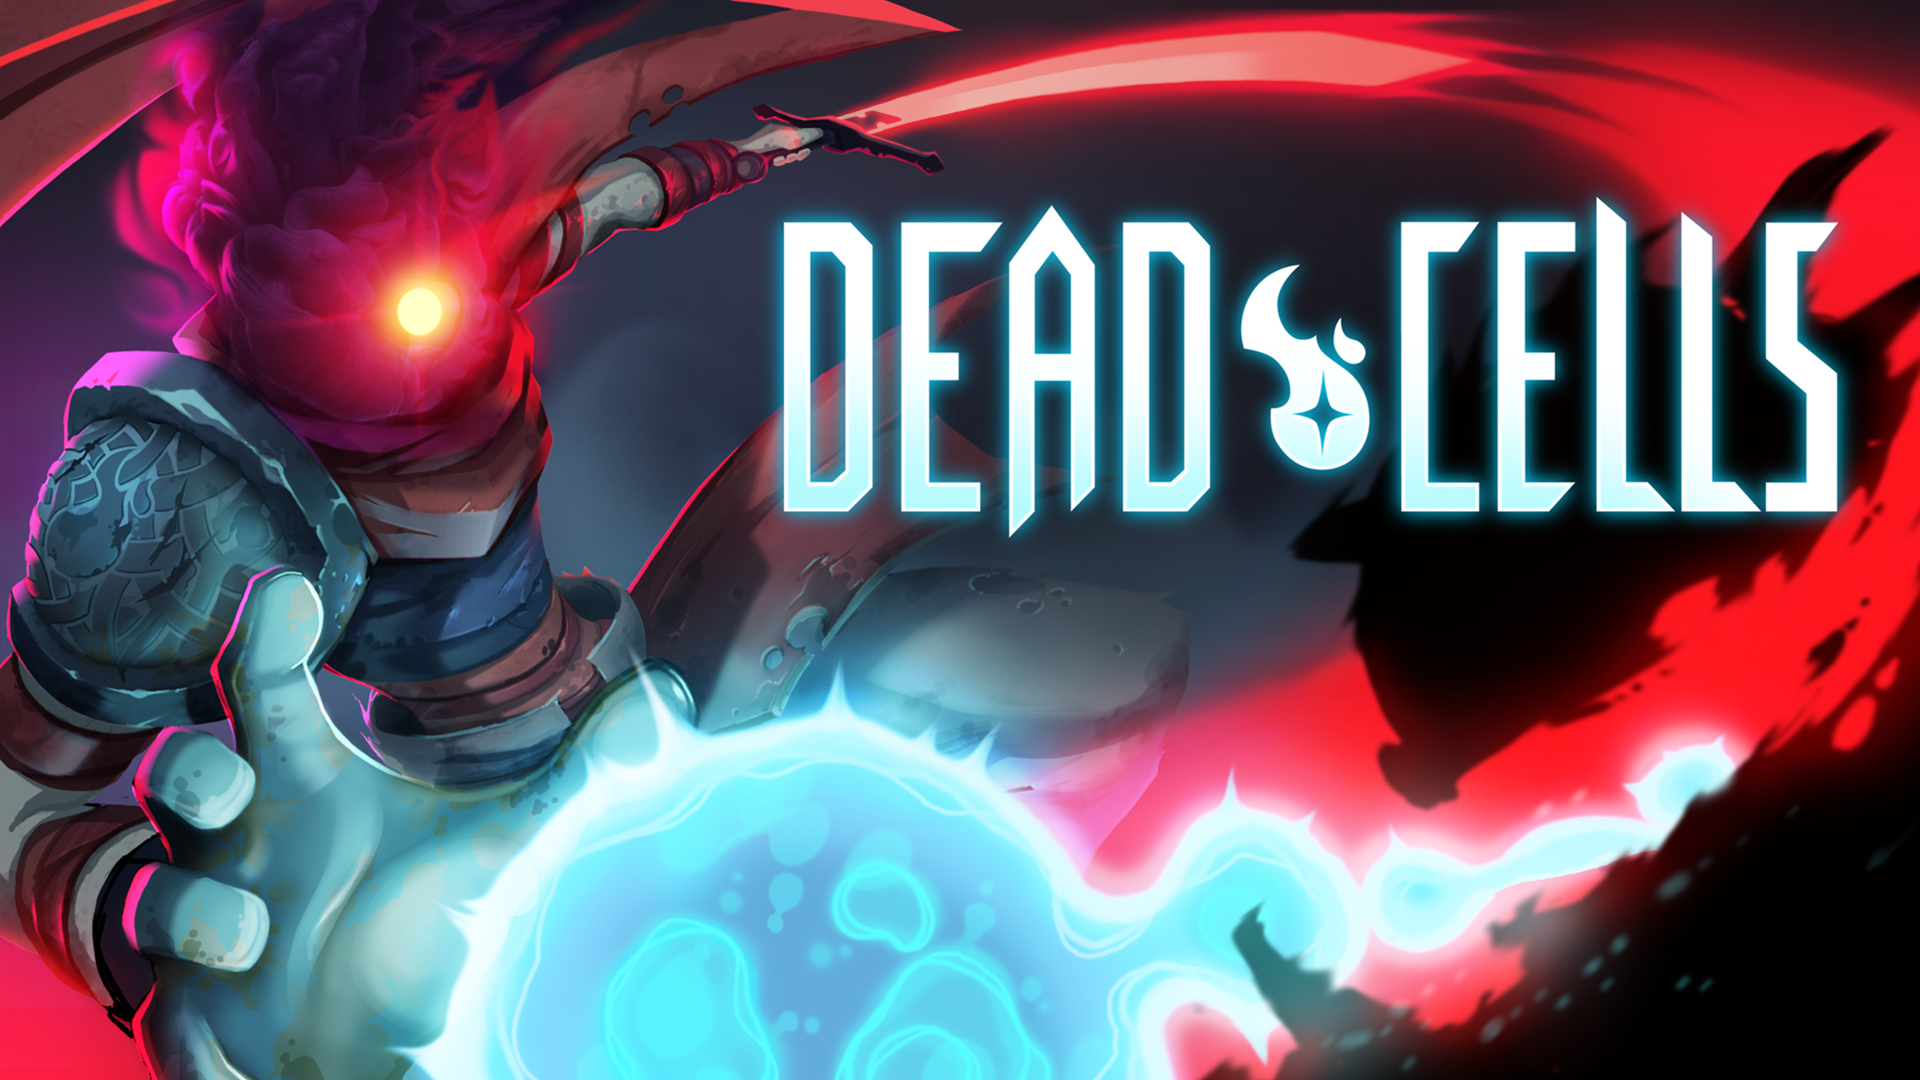 Video Game Dead Cells 1920x1080